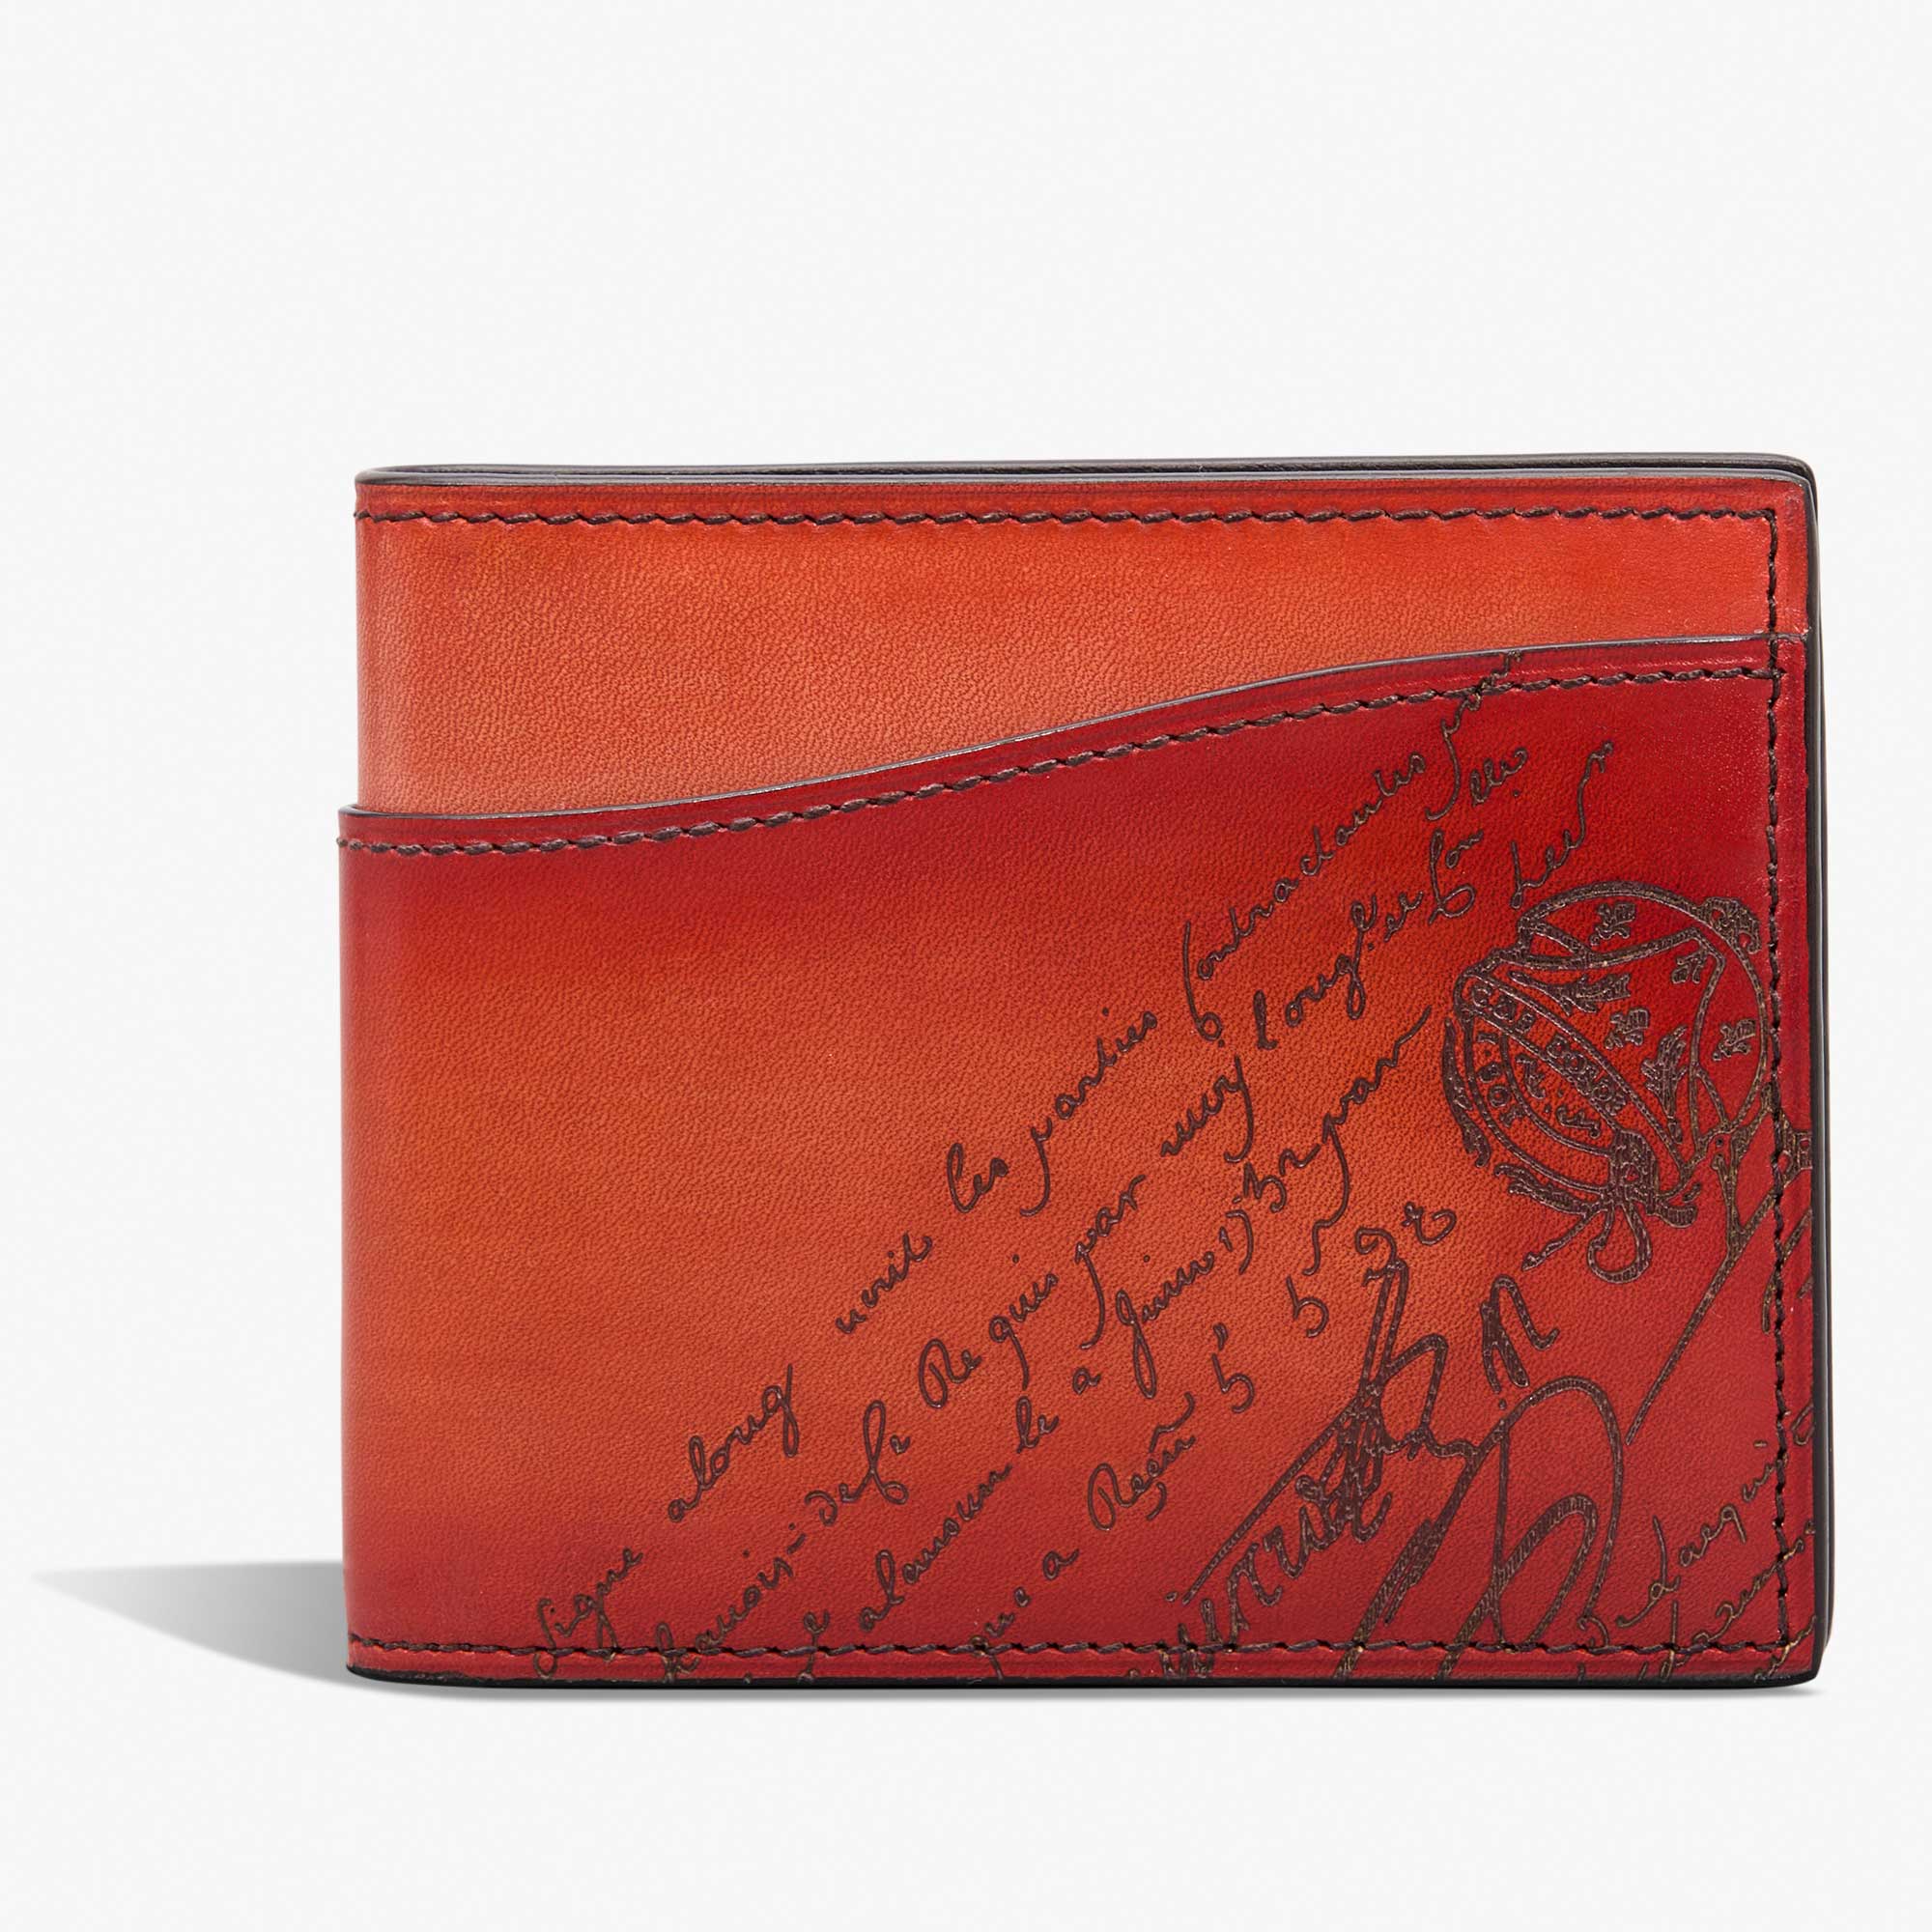 Makore Slim Scritto Leather Compact Wallet, TANGERINE, hi-res